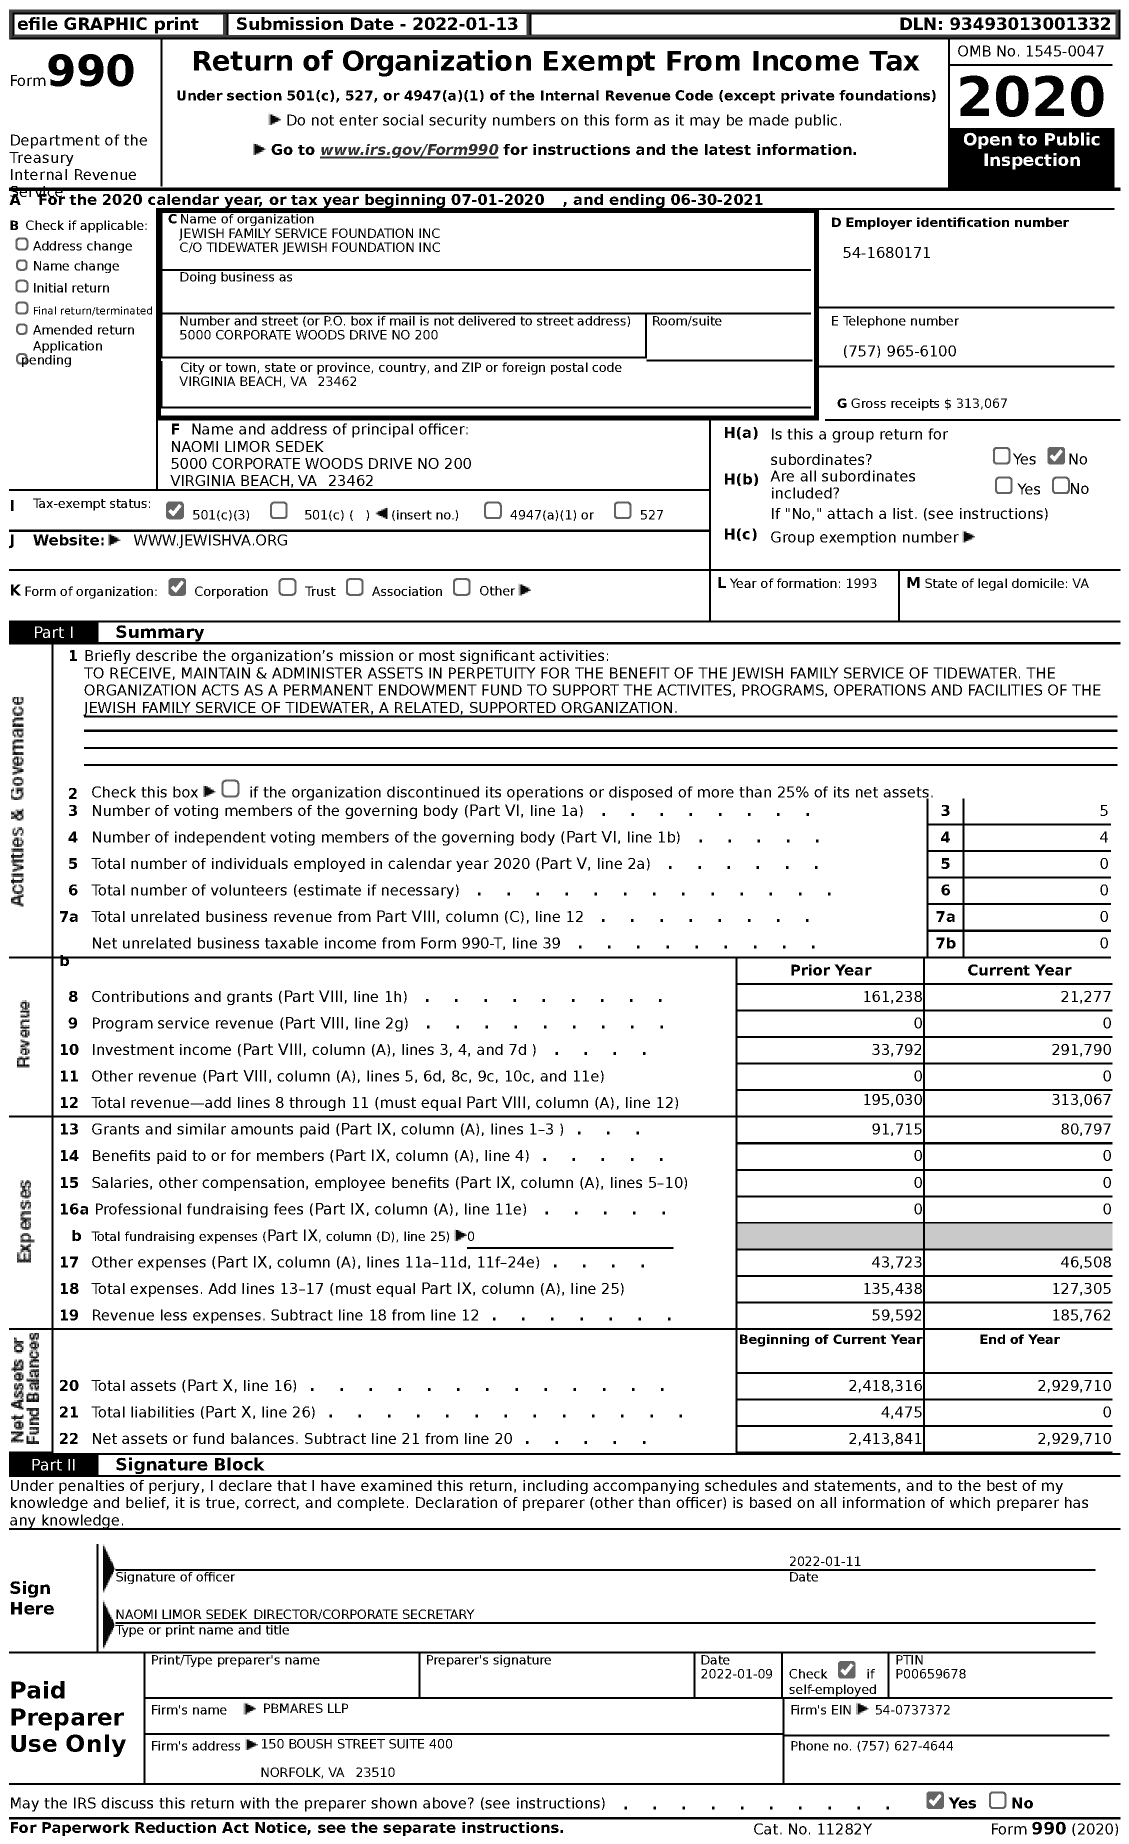 Image of first page of 2020 Form 990 for Jewish Family Service Foundation